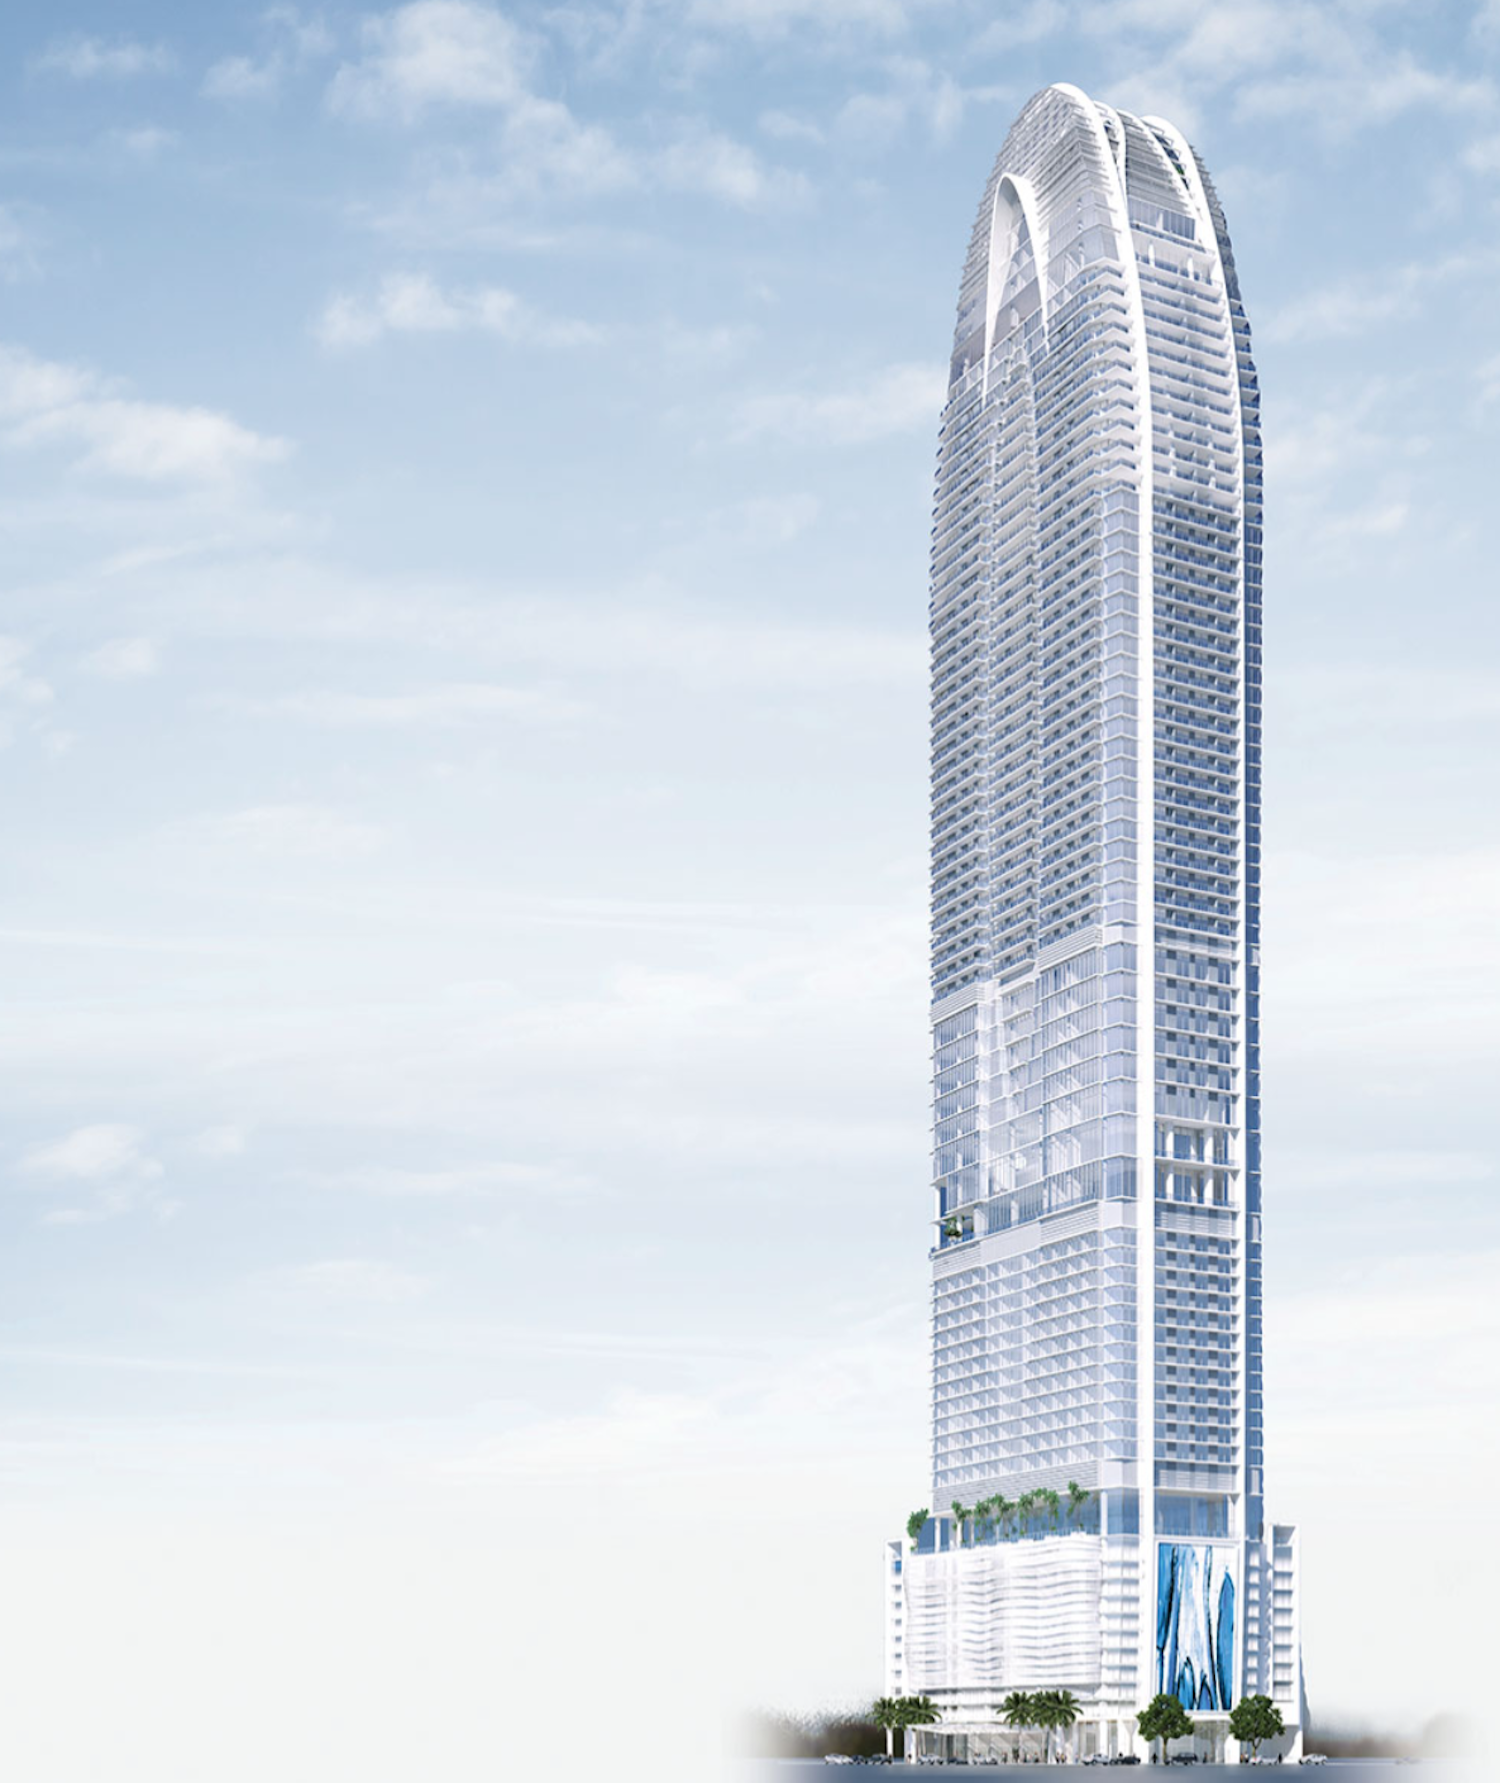 The Okan Tower. Designed by Behar Font & Partners.